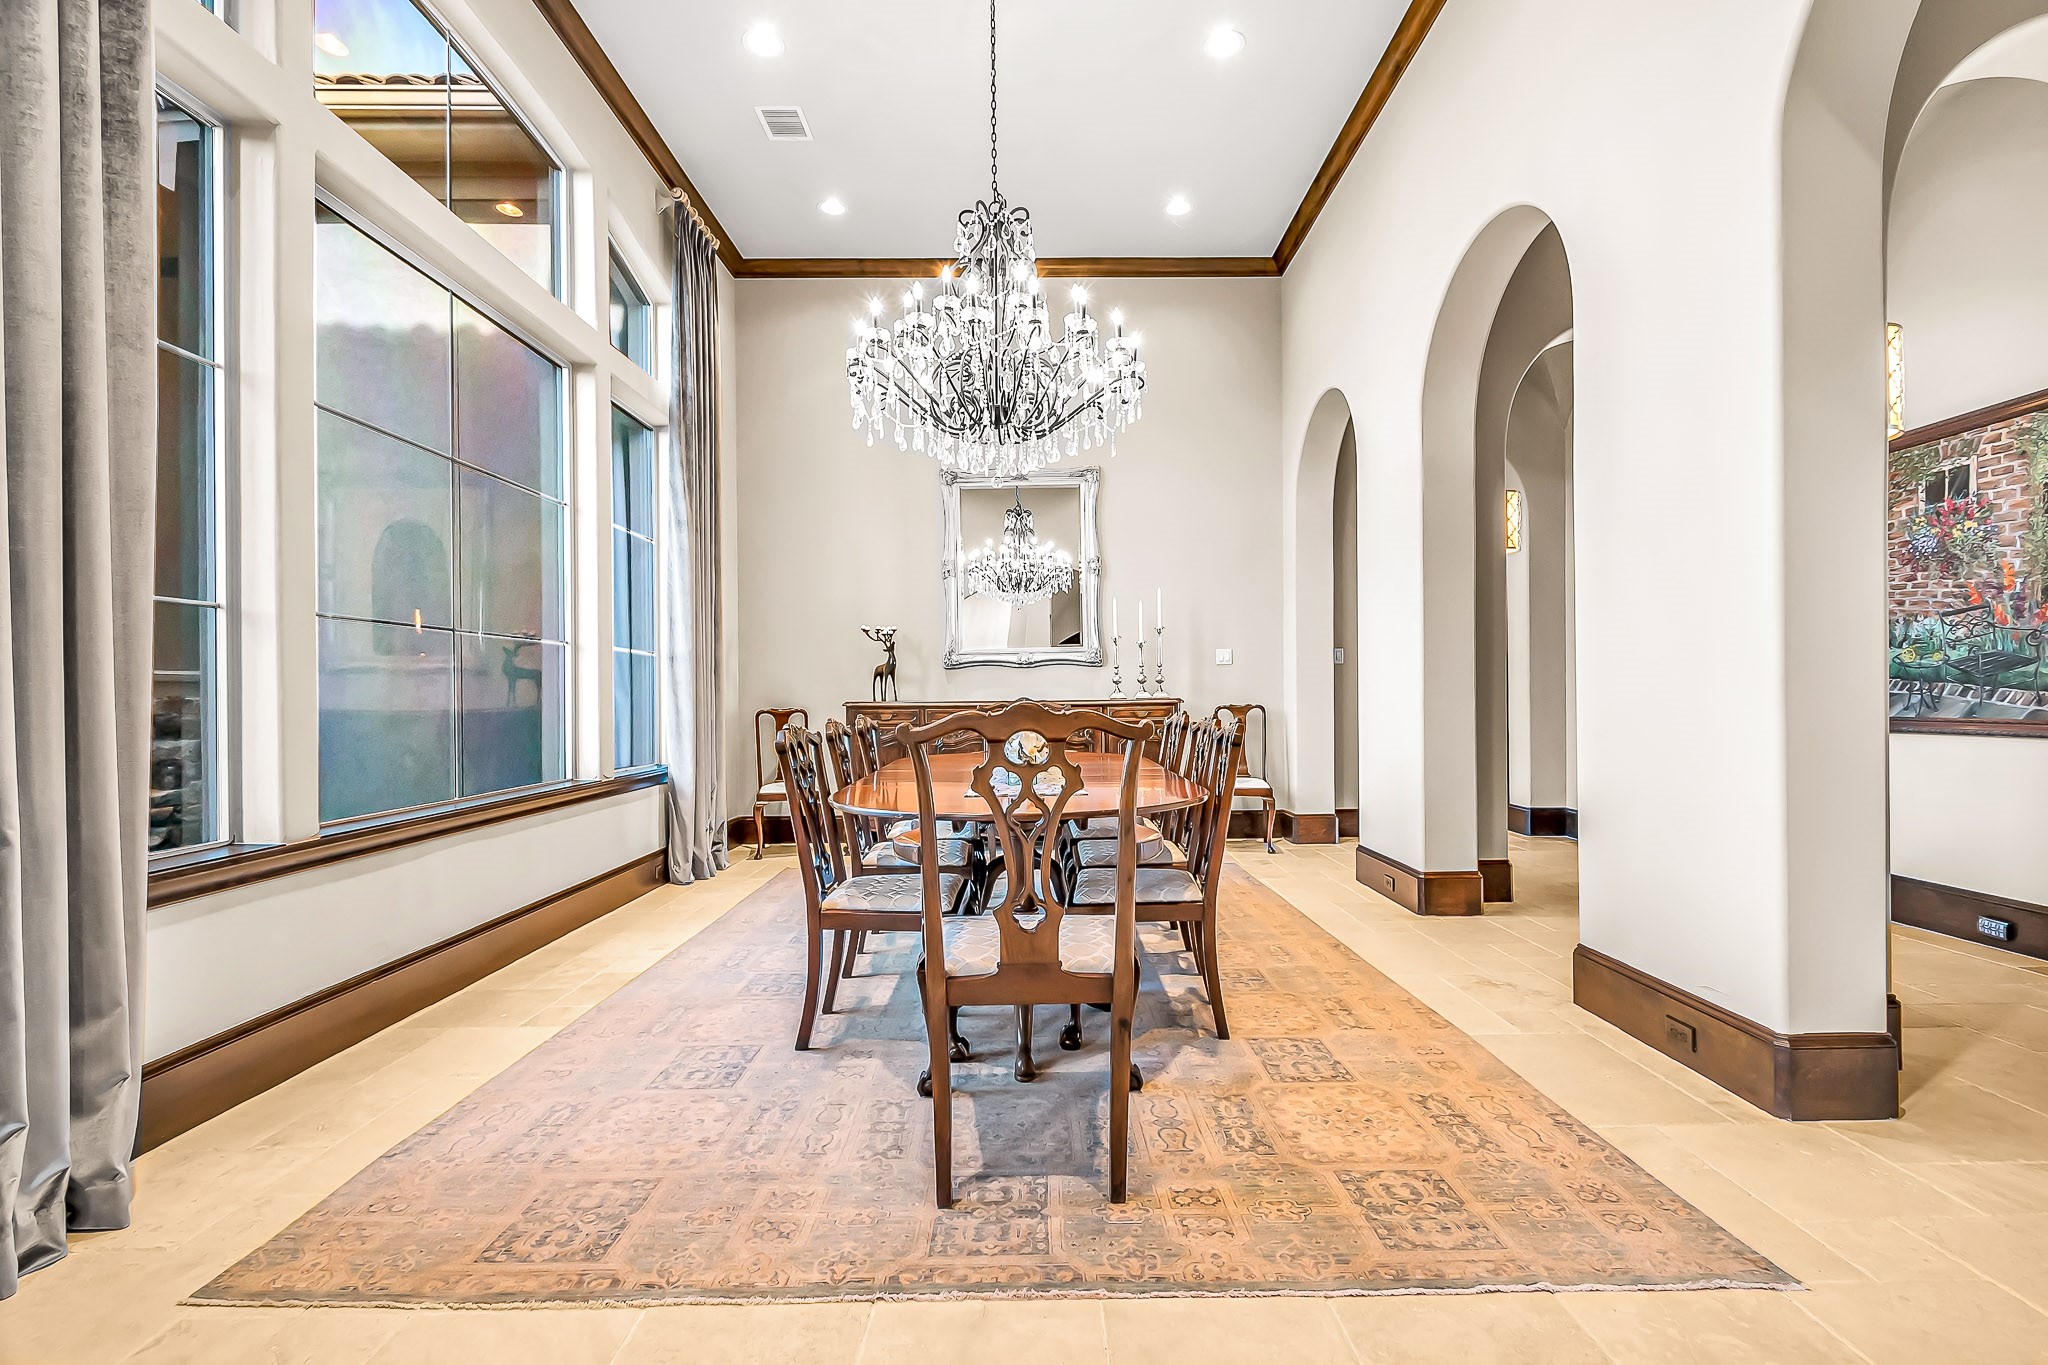 The stately formal dining room has a gorgeous chandelier centered over dining space large enough to accommodate larger groups and multiple furniture pieces.